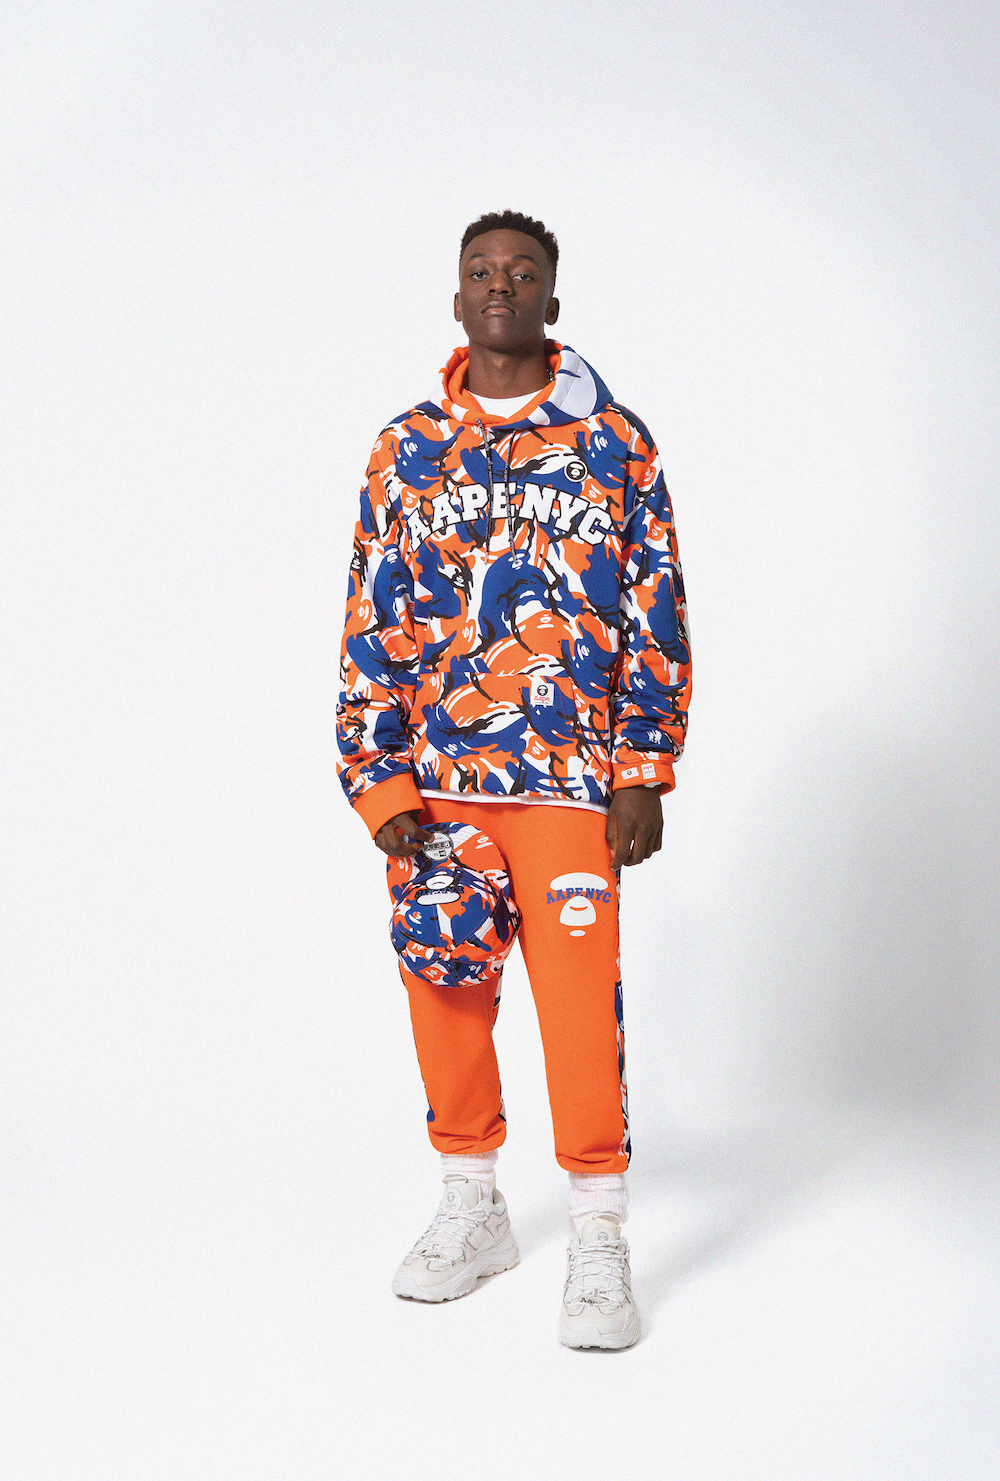 AAPE Bathing Ape NYC Collection